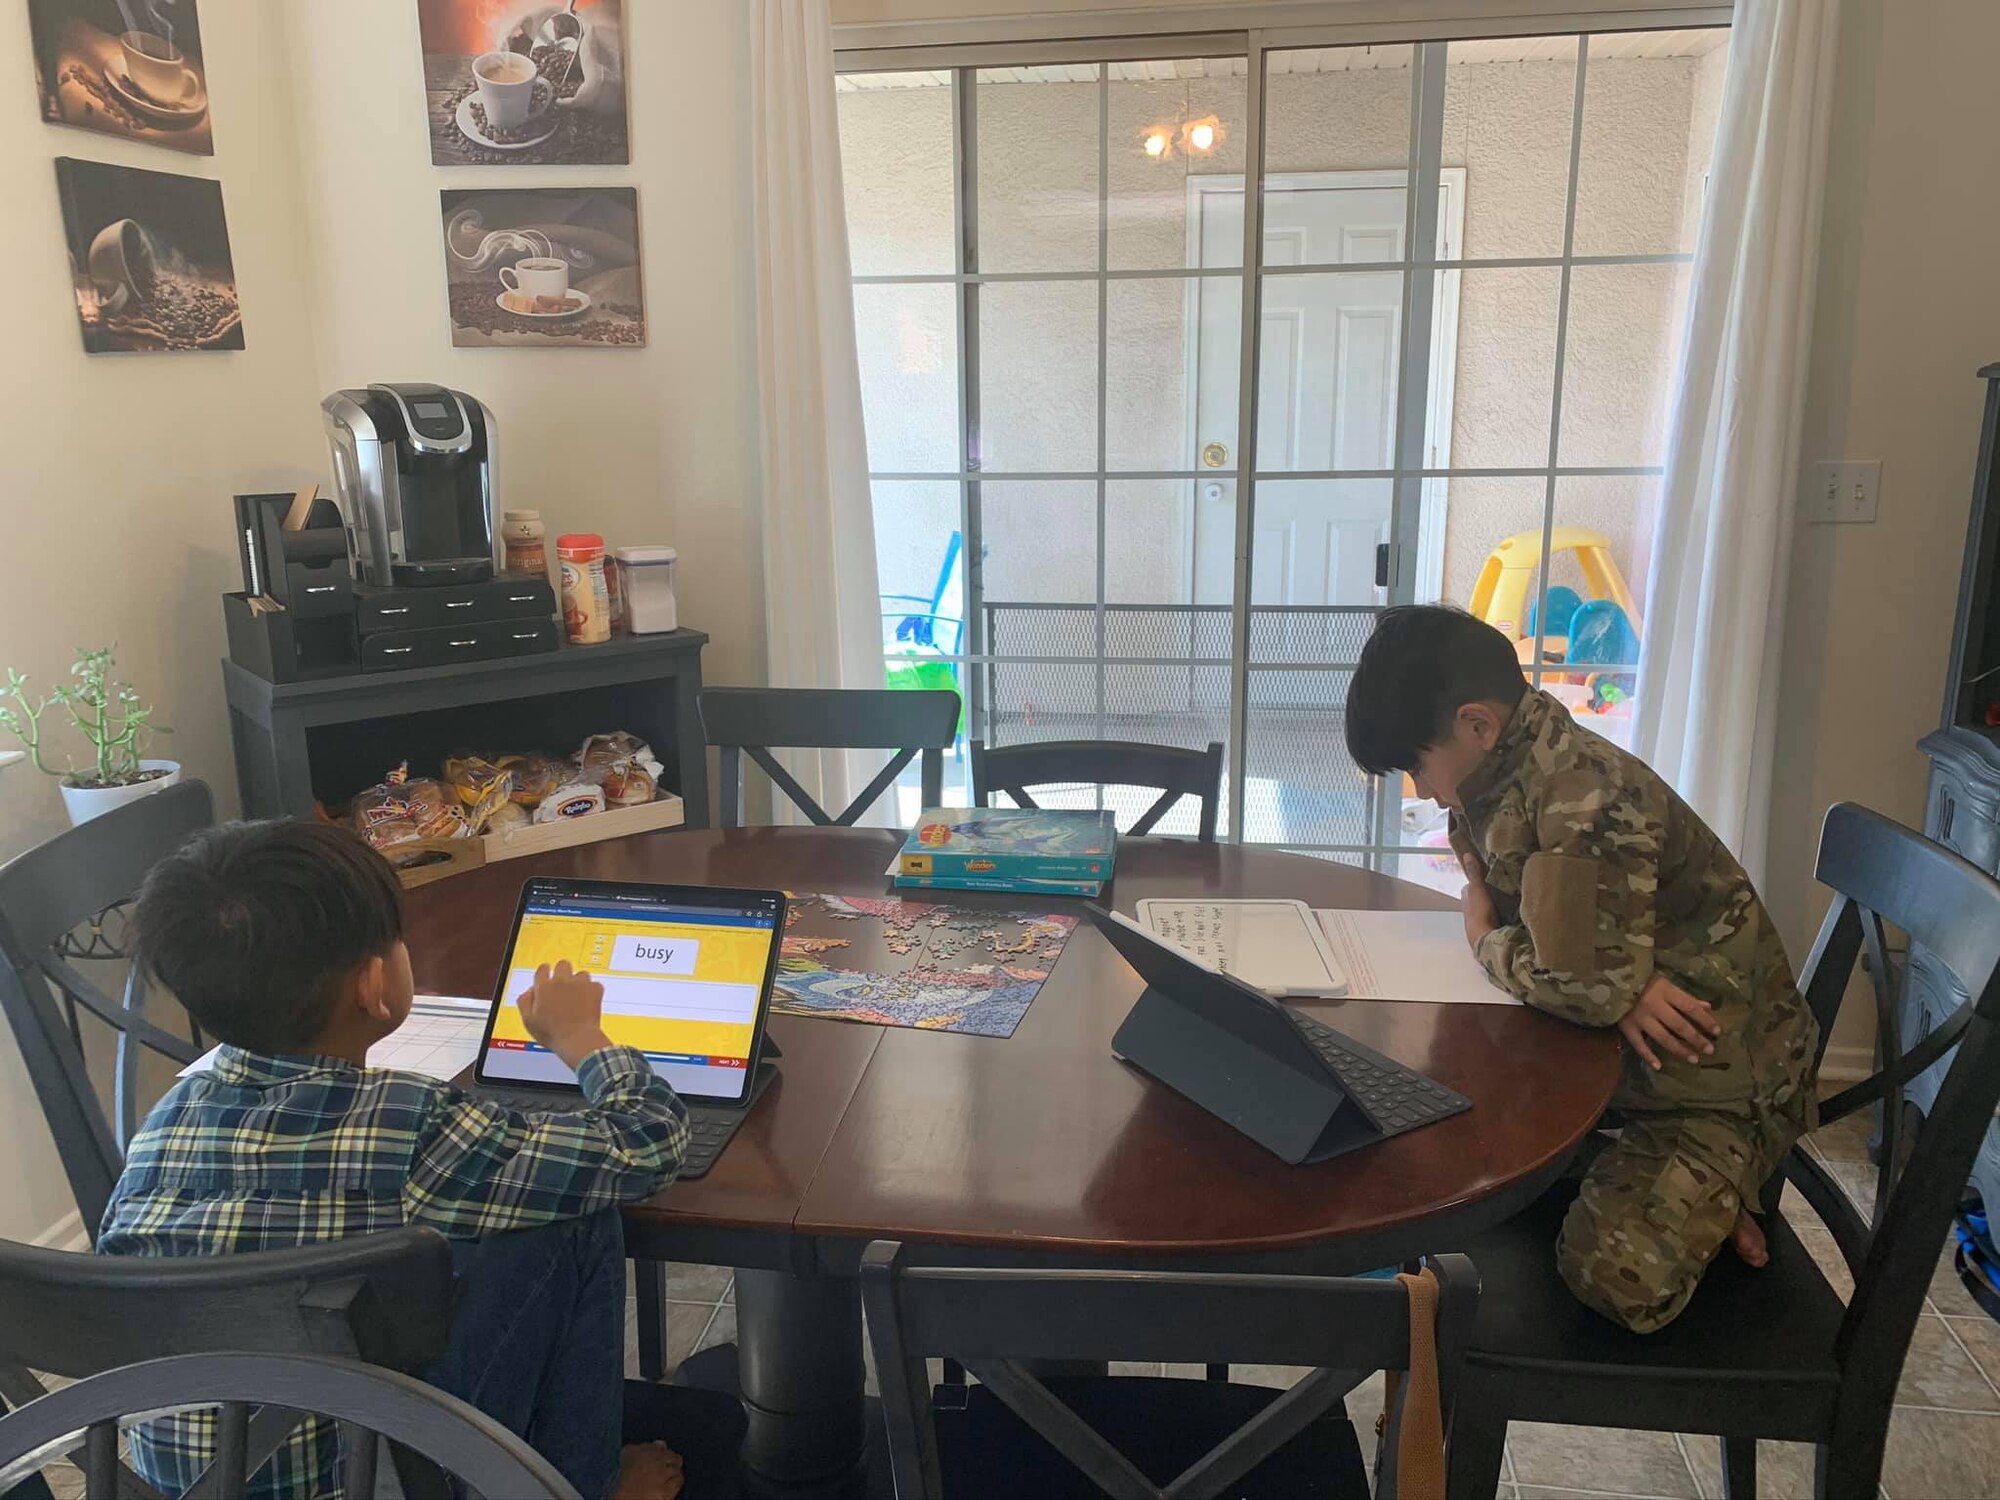 Cain and Eli Galbadores work on their distance learning assignments during COVID-19 April 27, 2020. Their mother, Yasmin Galbadores, runs a daycare program for mission-essential parents while also ensuring her own children receive proper education. (courtesy photo)